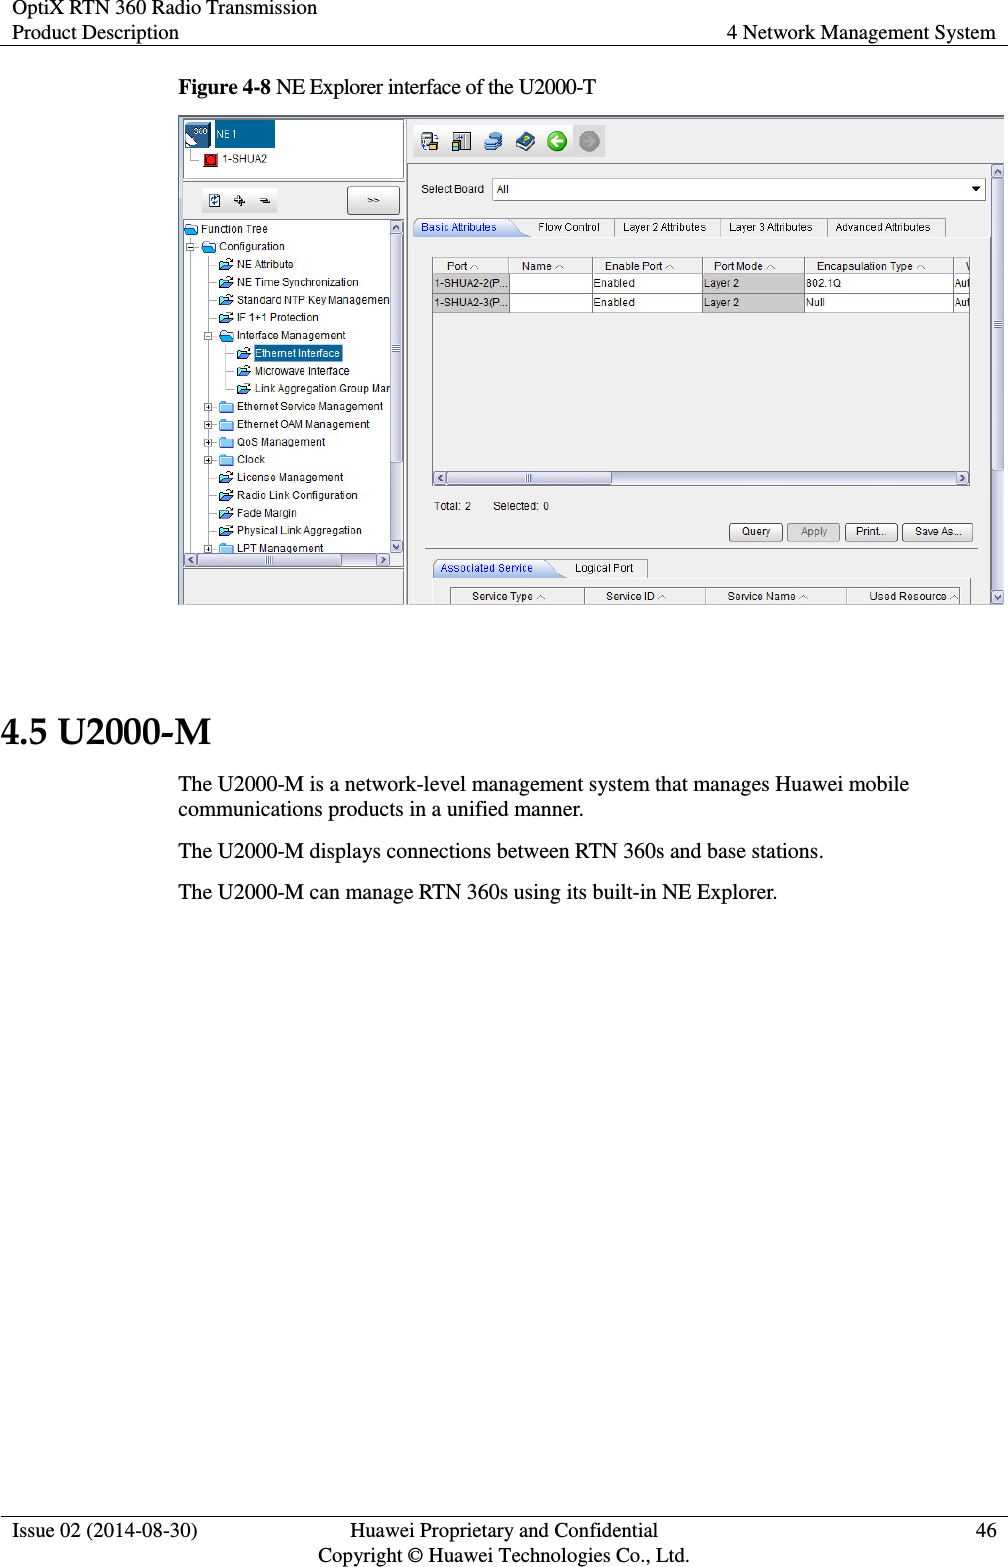 OptiX RTN 360 Radio Transmission Product Description 4 Network Management System  Issue 02 (2014-08-30) Huawei Proprietary and Confidential                                     Copyright © Huawei Technologies Co., Ltd. 46  Figure 4-8 NE Explorer interface of the U2000-T   4.5 U2000-M The U2000-M is a network-level management system that manages Huawei mobile communications products in a unified manner. The U2000-M displays connections between RTN 360s and base stations. The U2000-M can manage RTN 360s using its built-in NE Explorer. 